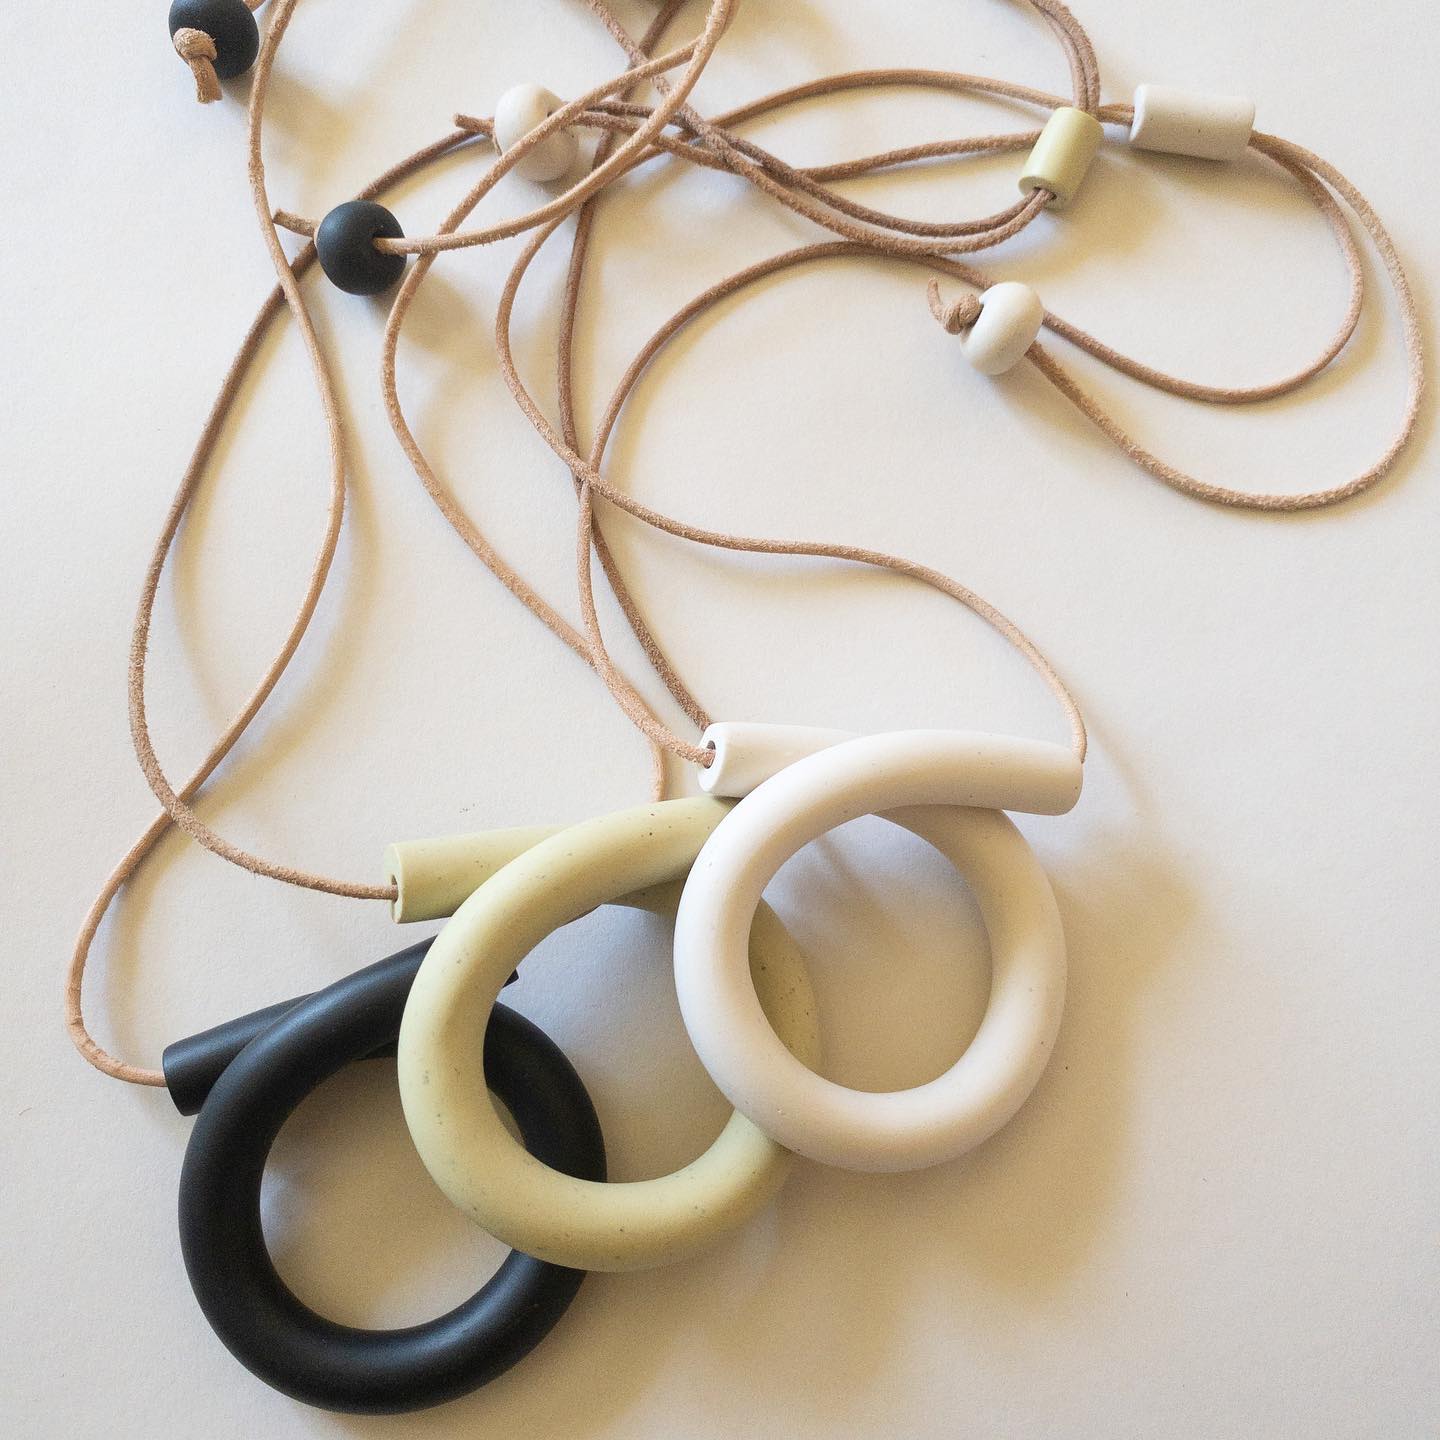 Loop Necklace - Lavender - | Little Pieces Jewelry